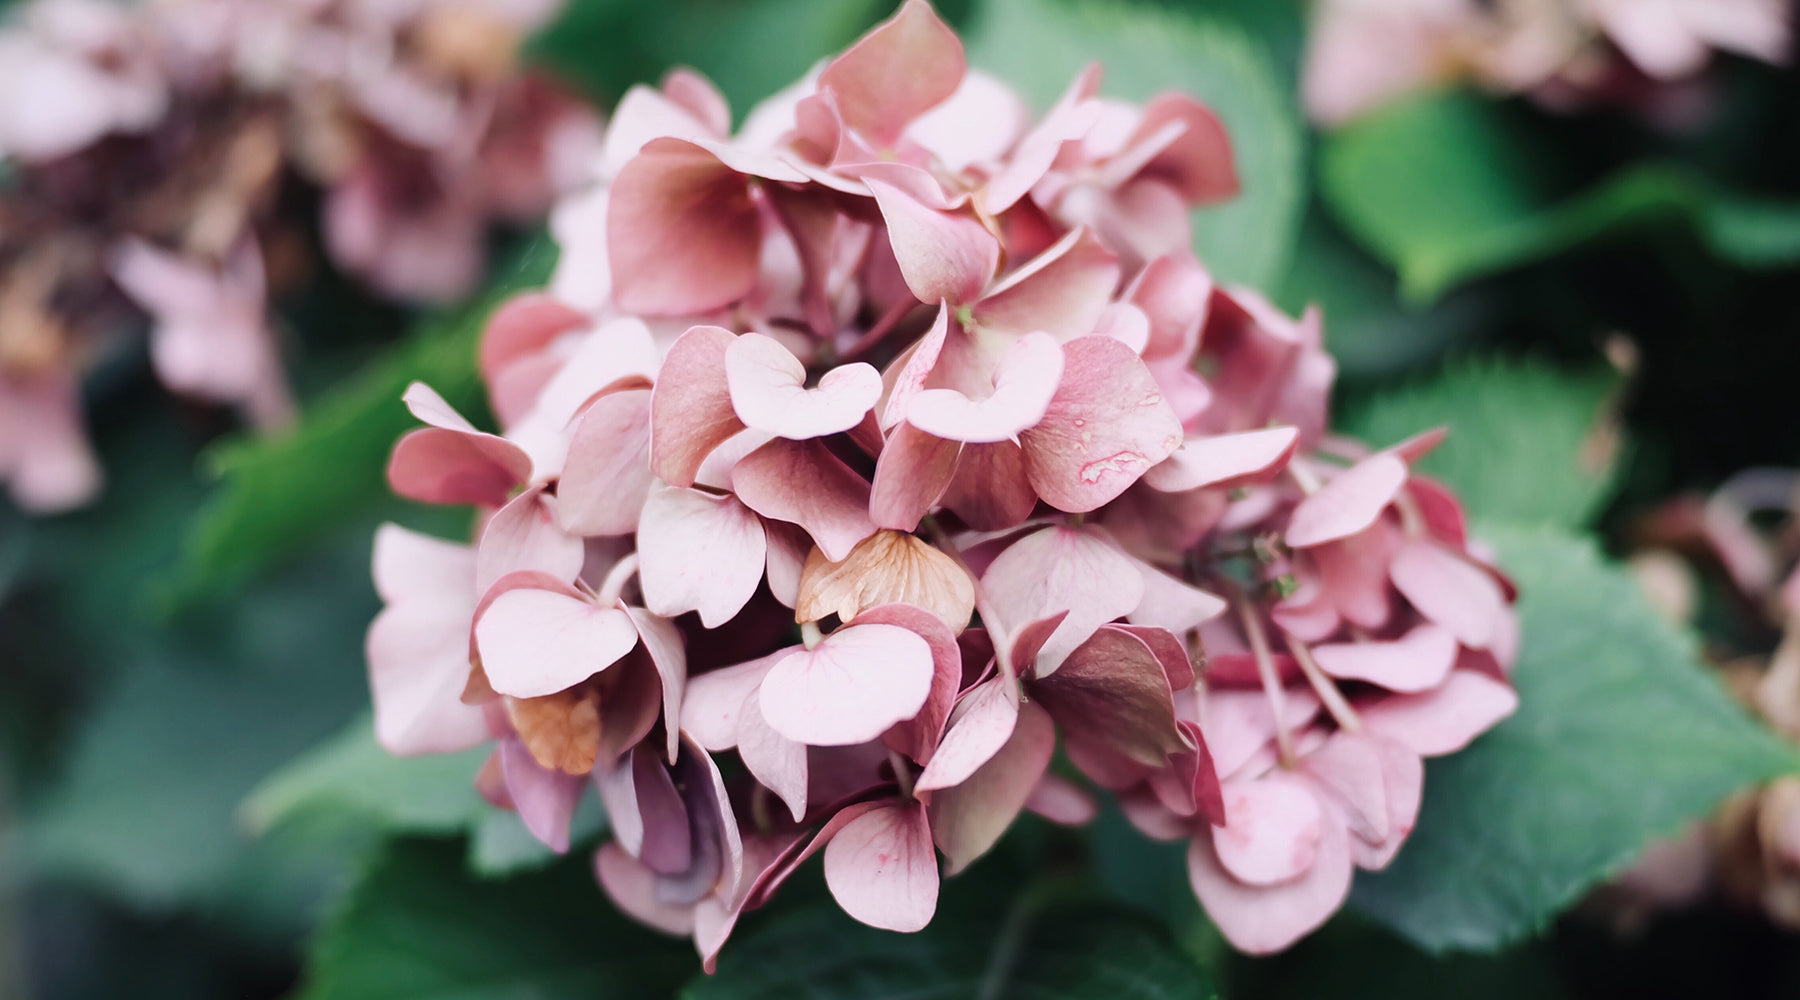 Hydrangea Facts and How They Got Their Colour